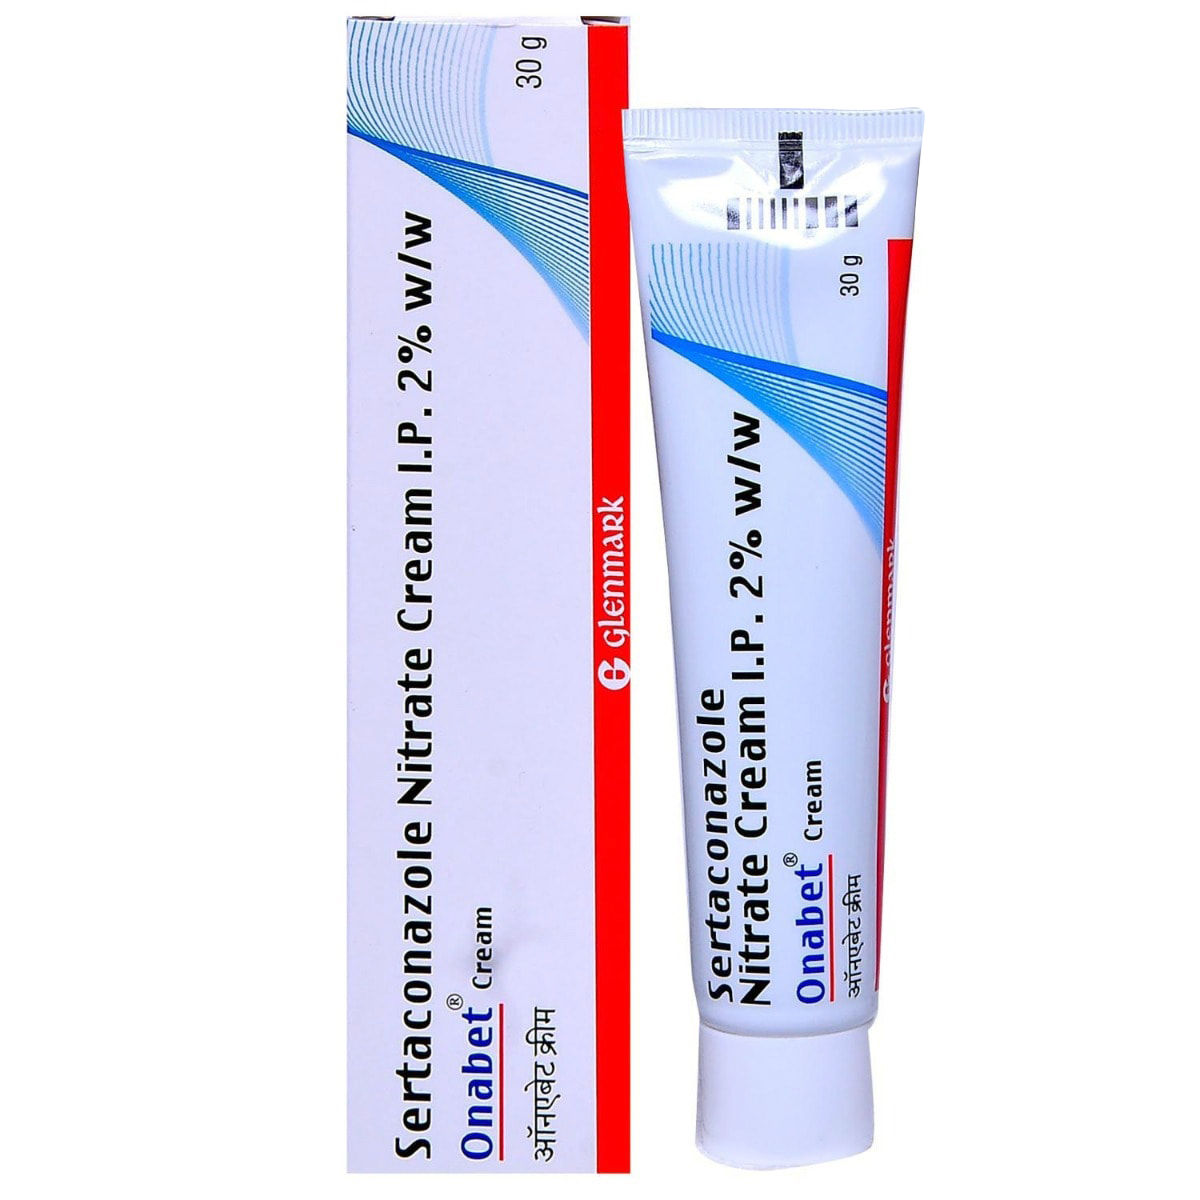 onabet sd topical solution 15ml